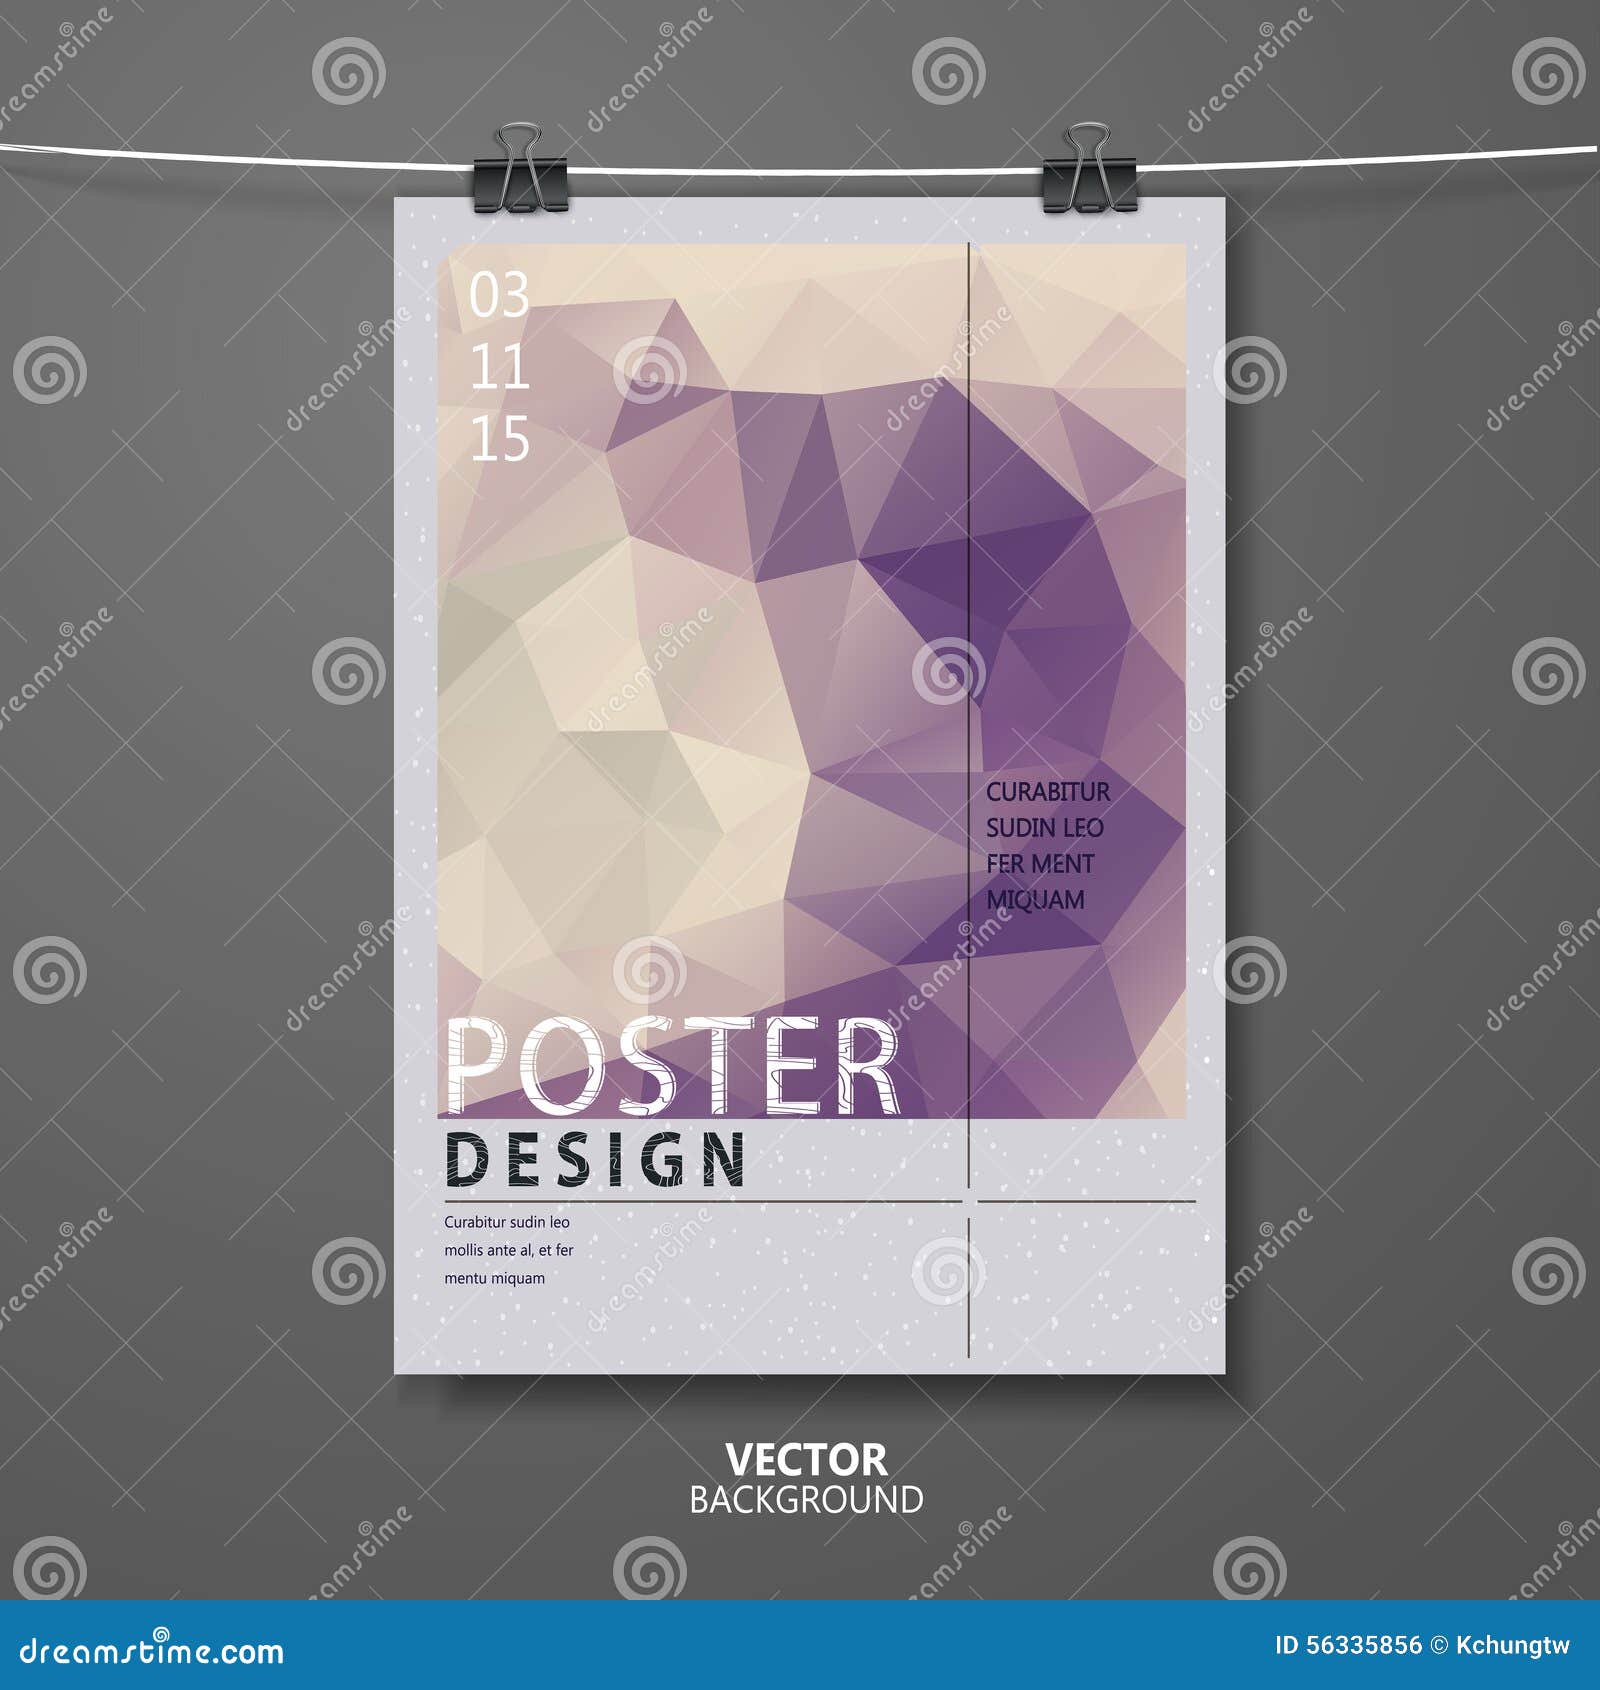 Trendy Poster Template Design Stock Vector Illustration of contemporary, office: 56335856